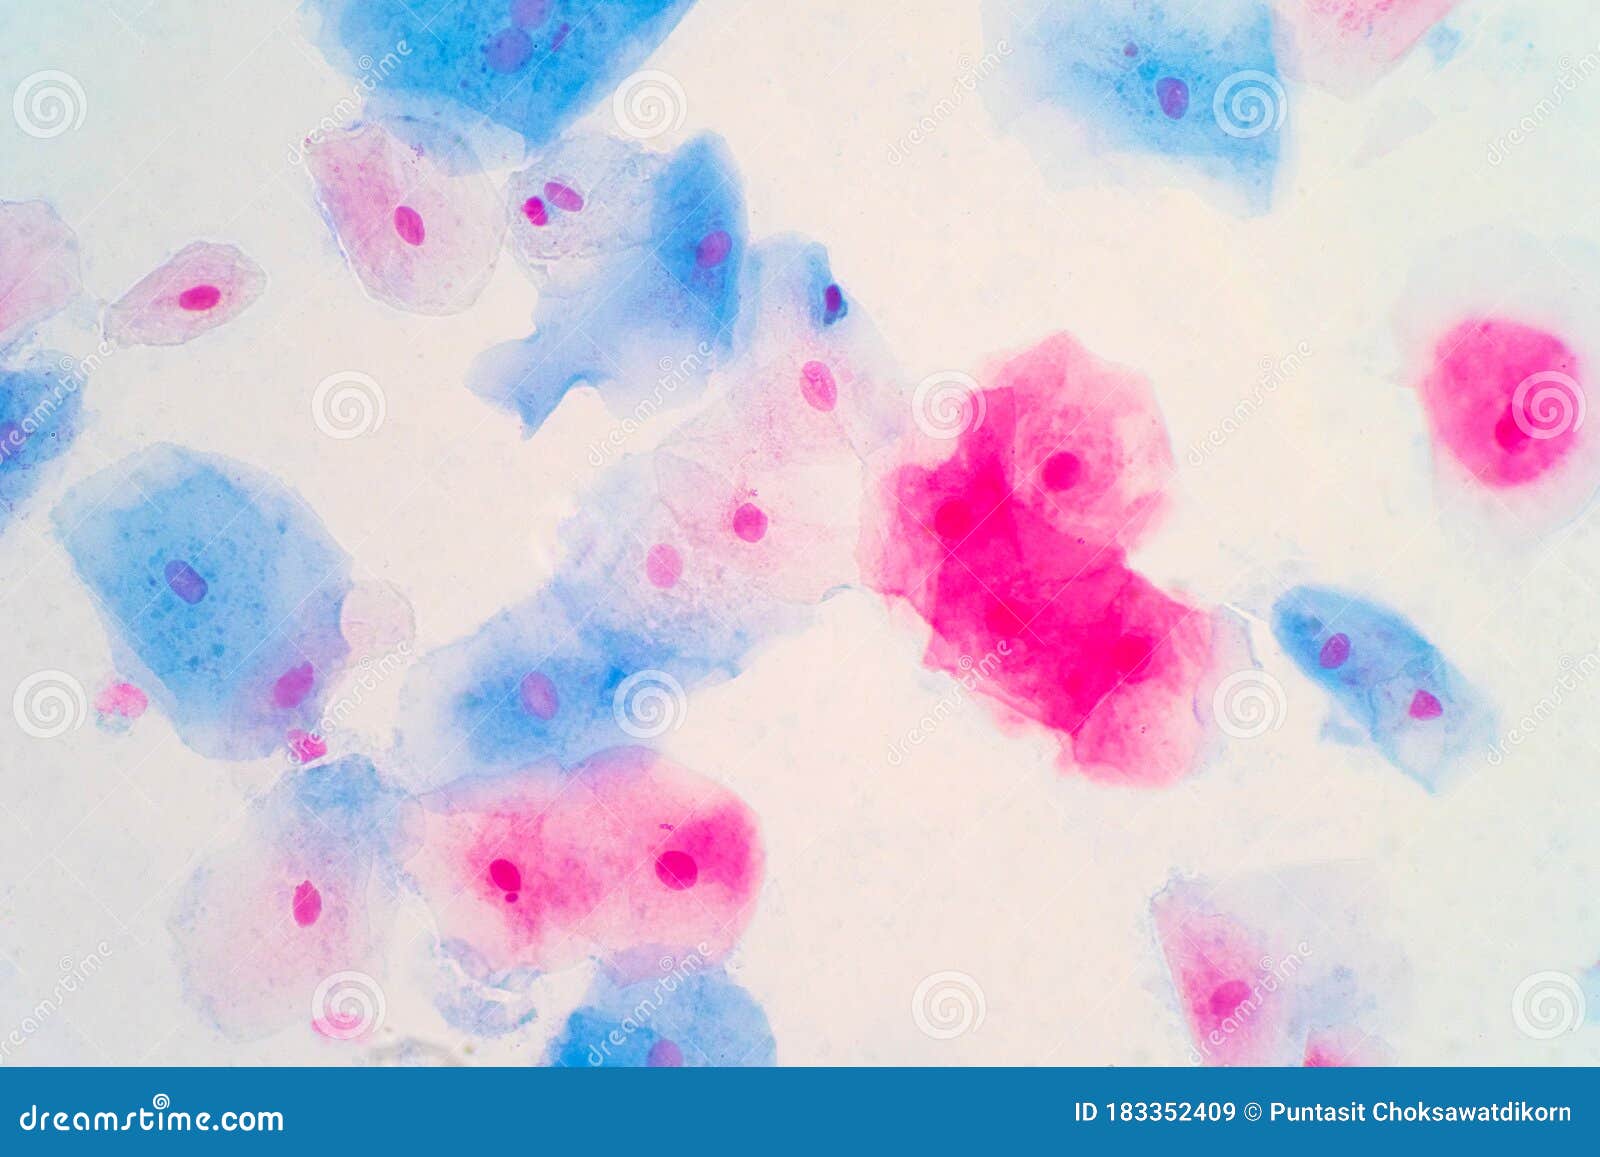 squamous epithelial cells of human cervix under the microscope view